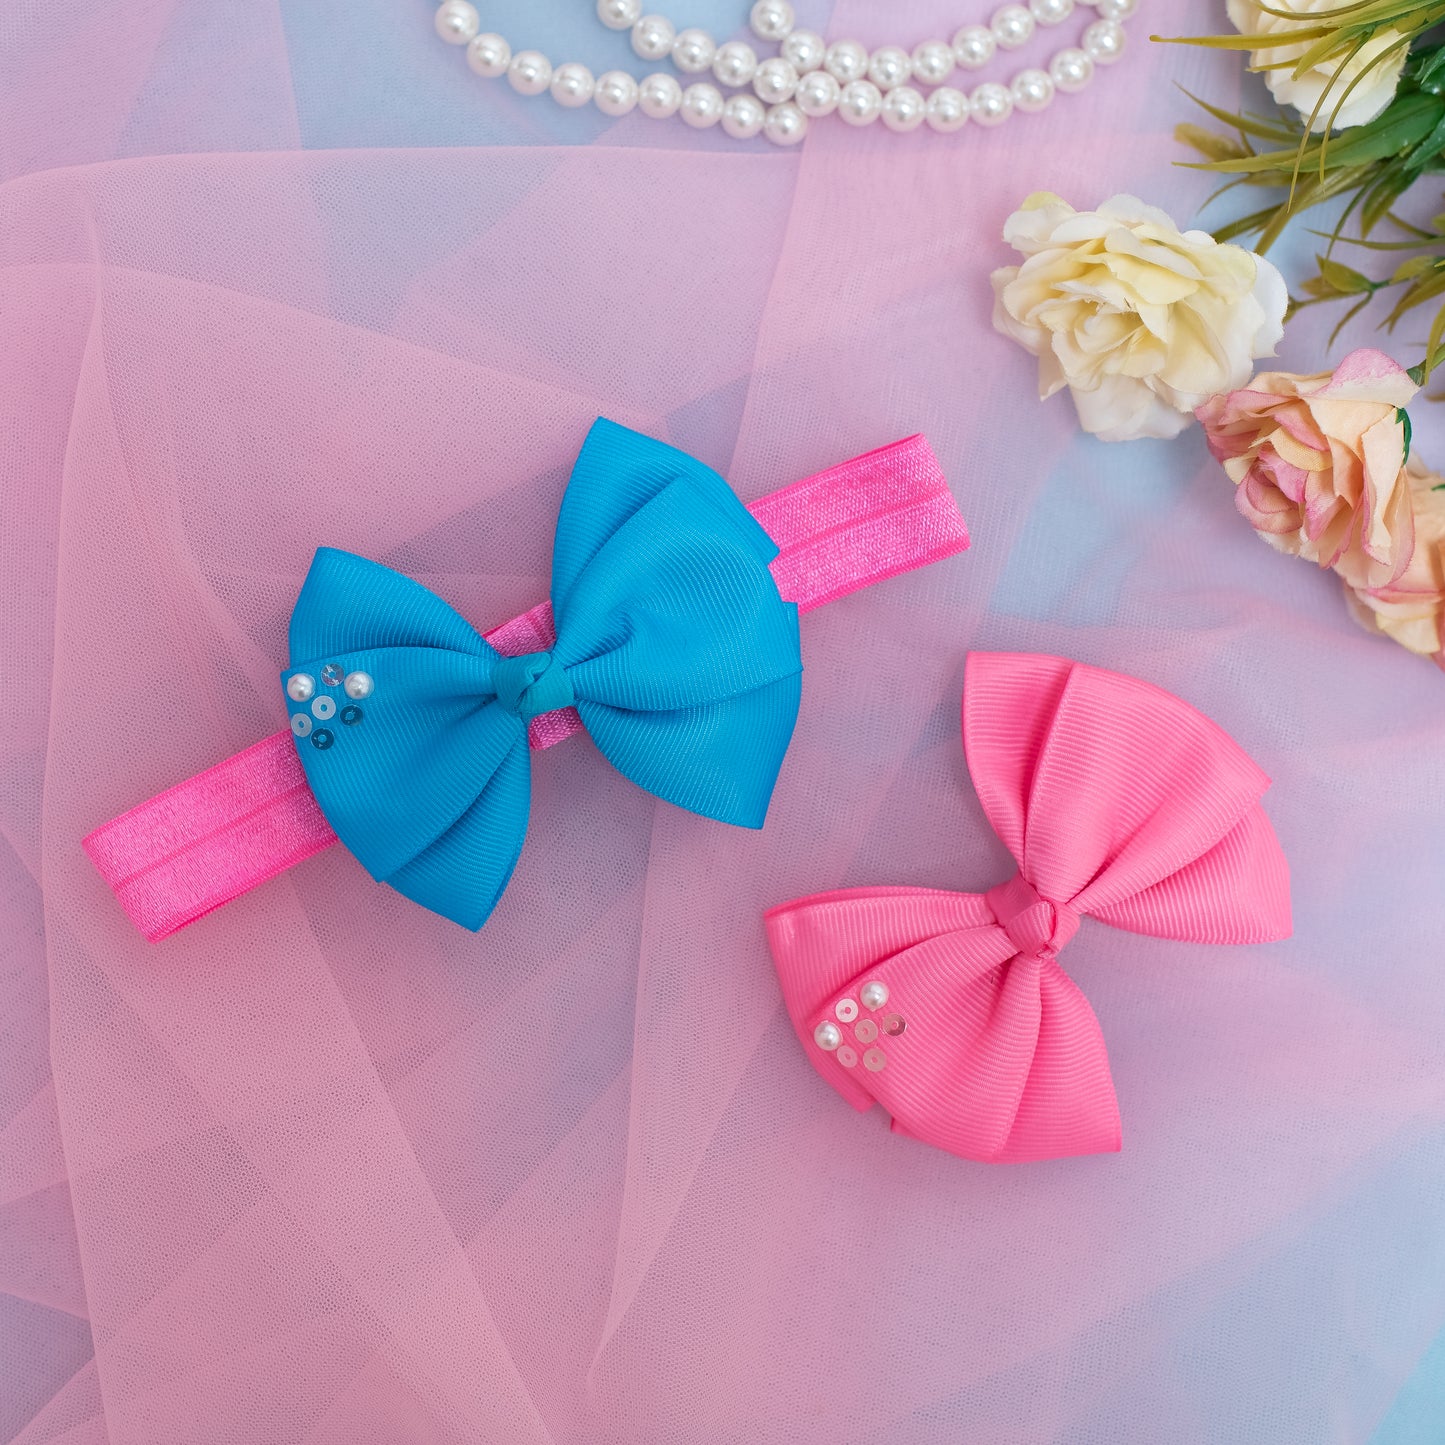 Combo: 1 Stretchy Band with 2 Layered Bows embellished with Sequinze and Pearls - Blue, Pink